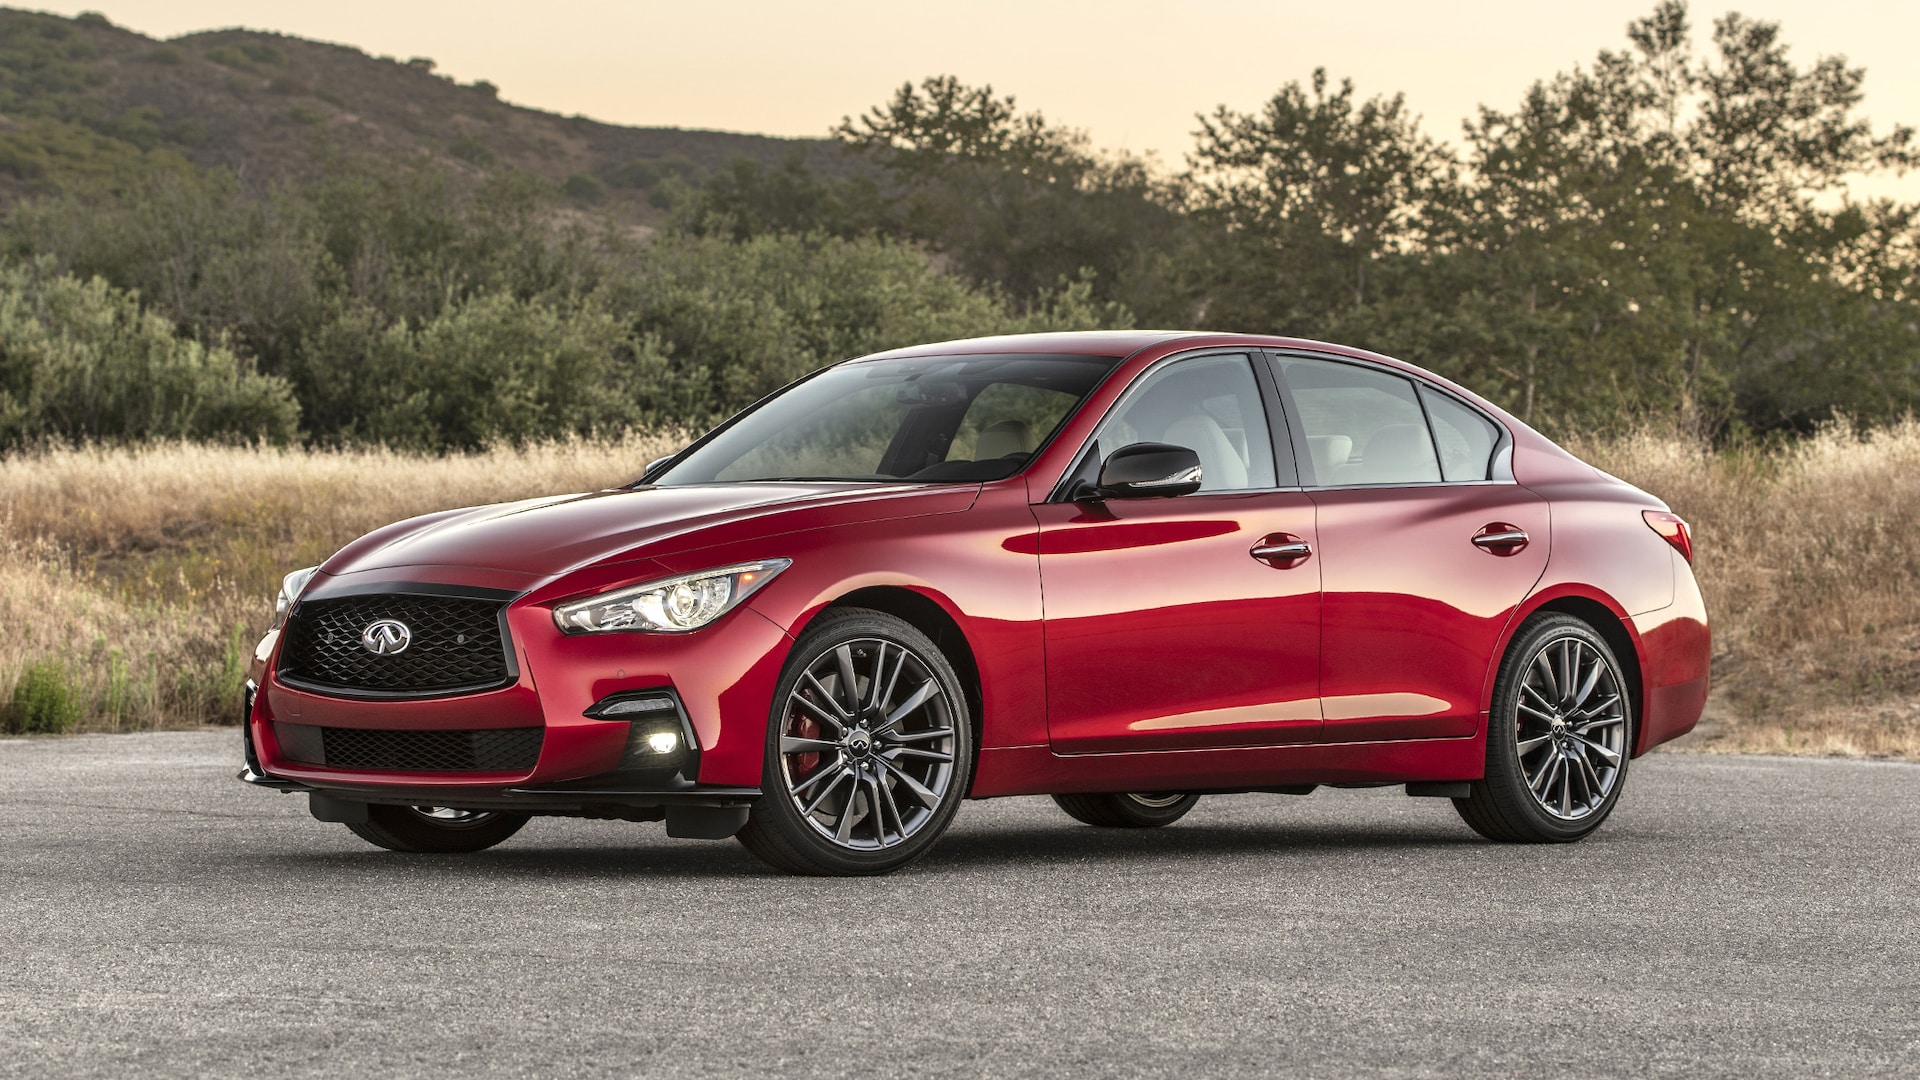 2023 Infiniti Q50 Prices, Reviews, and Photos - MotorTrend